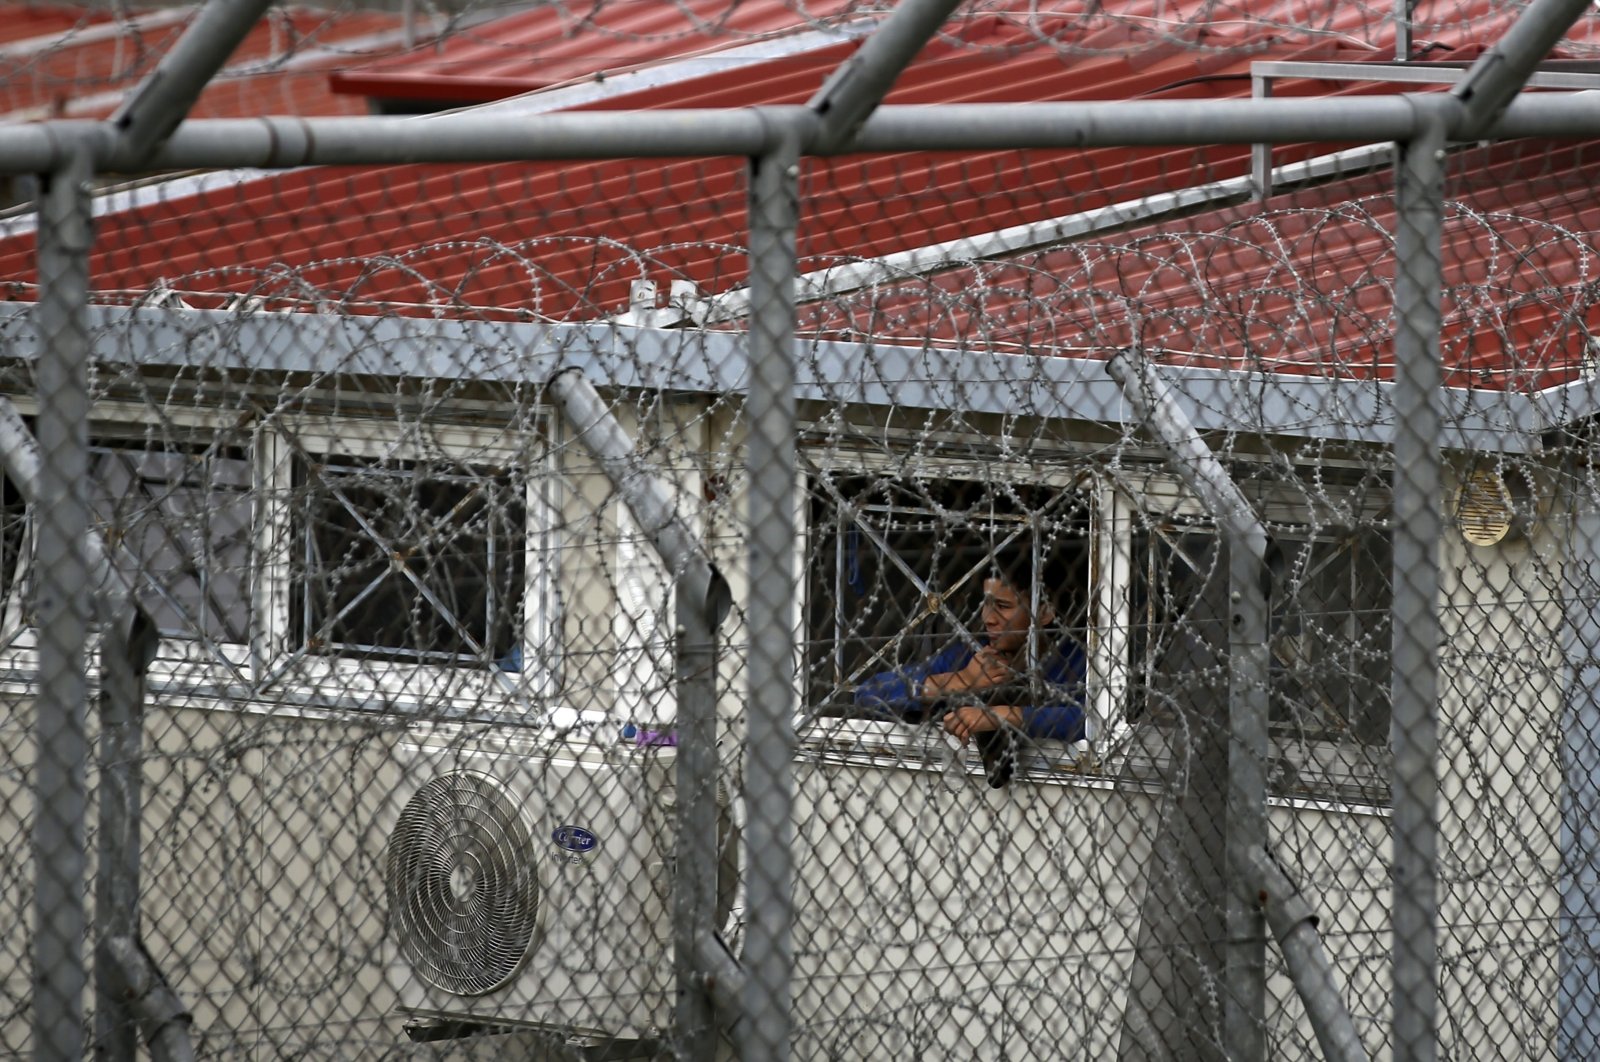 In this file photo dated Sunday, March 8, 2020, a migrant looks out from a detention center in the village of Fylakio, Evros region, near the Greek-Turkish border. (AP Photo)